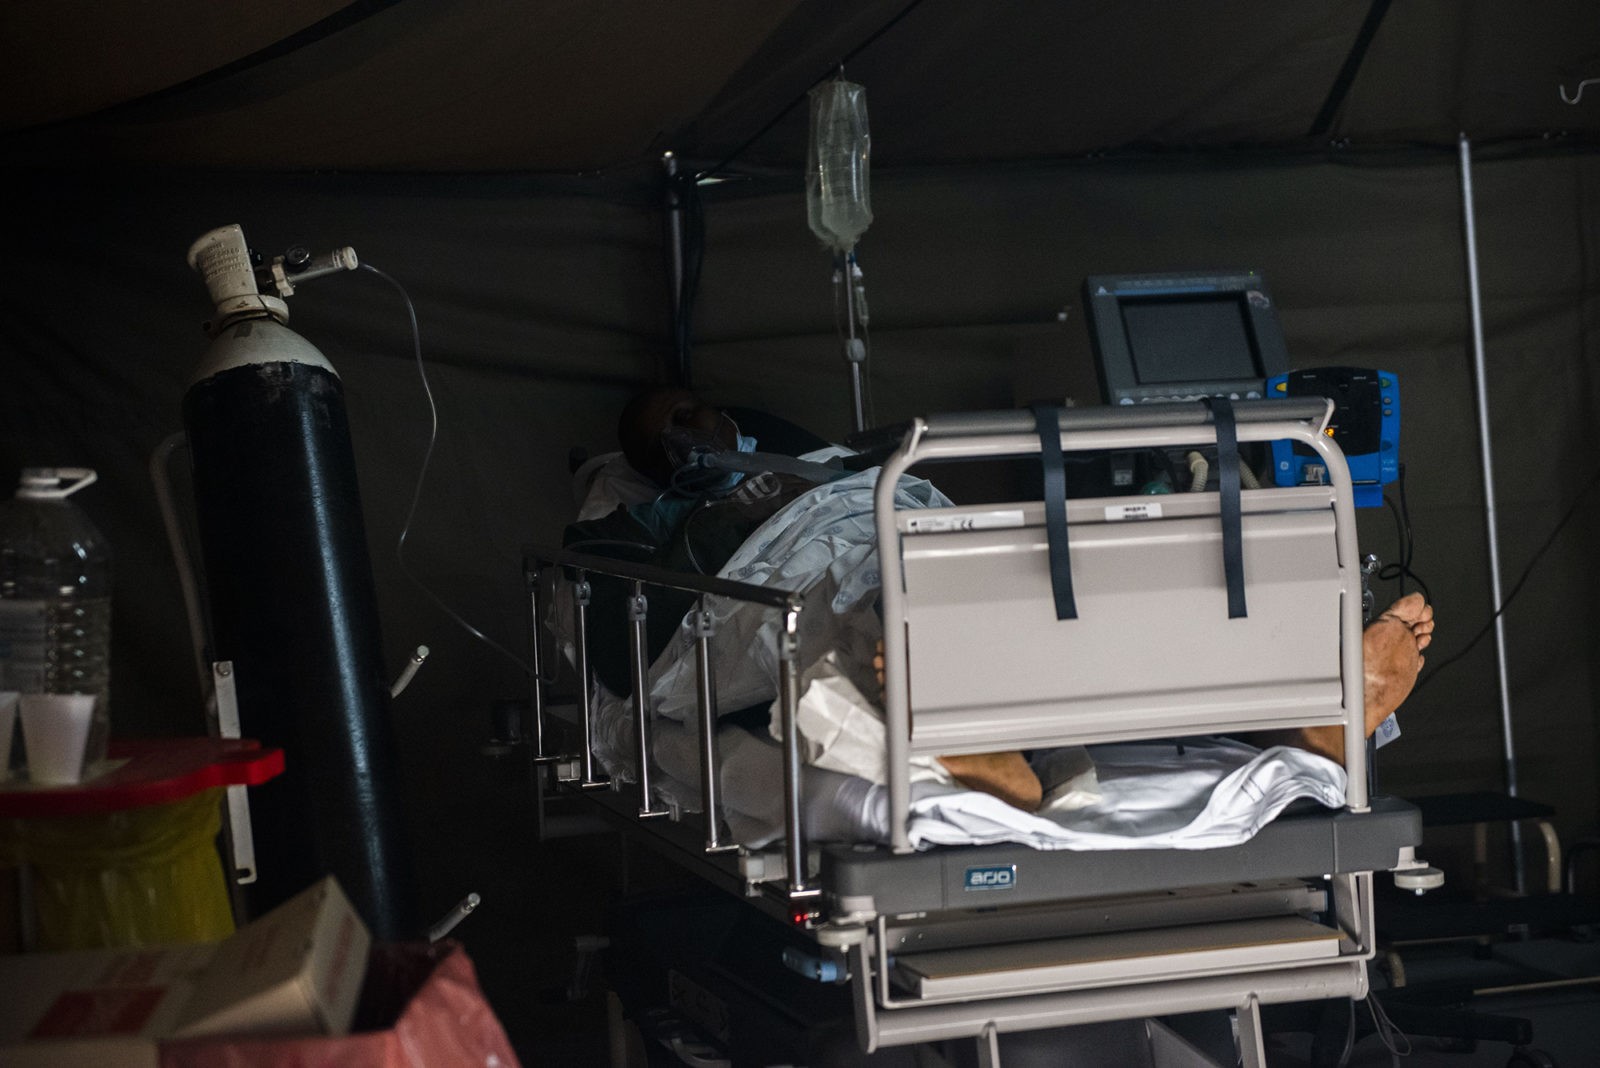 A patient in a tent dedicated to the treatment of possible Covid-19 patients at the Tshwane District Hospital in Pretoria on 10 July 2020. (Photo by Gallo Images/Alet Pretorius)